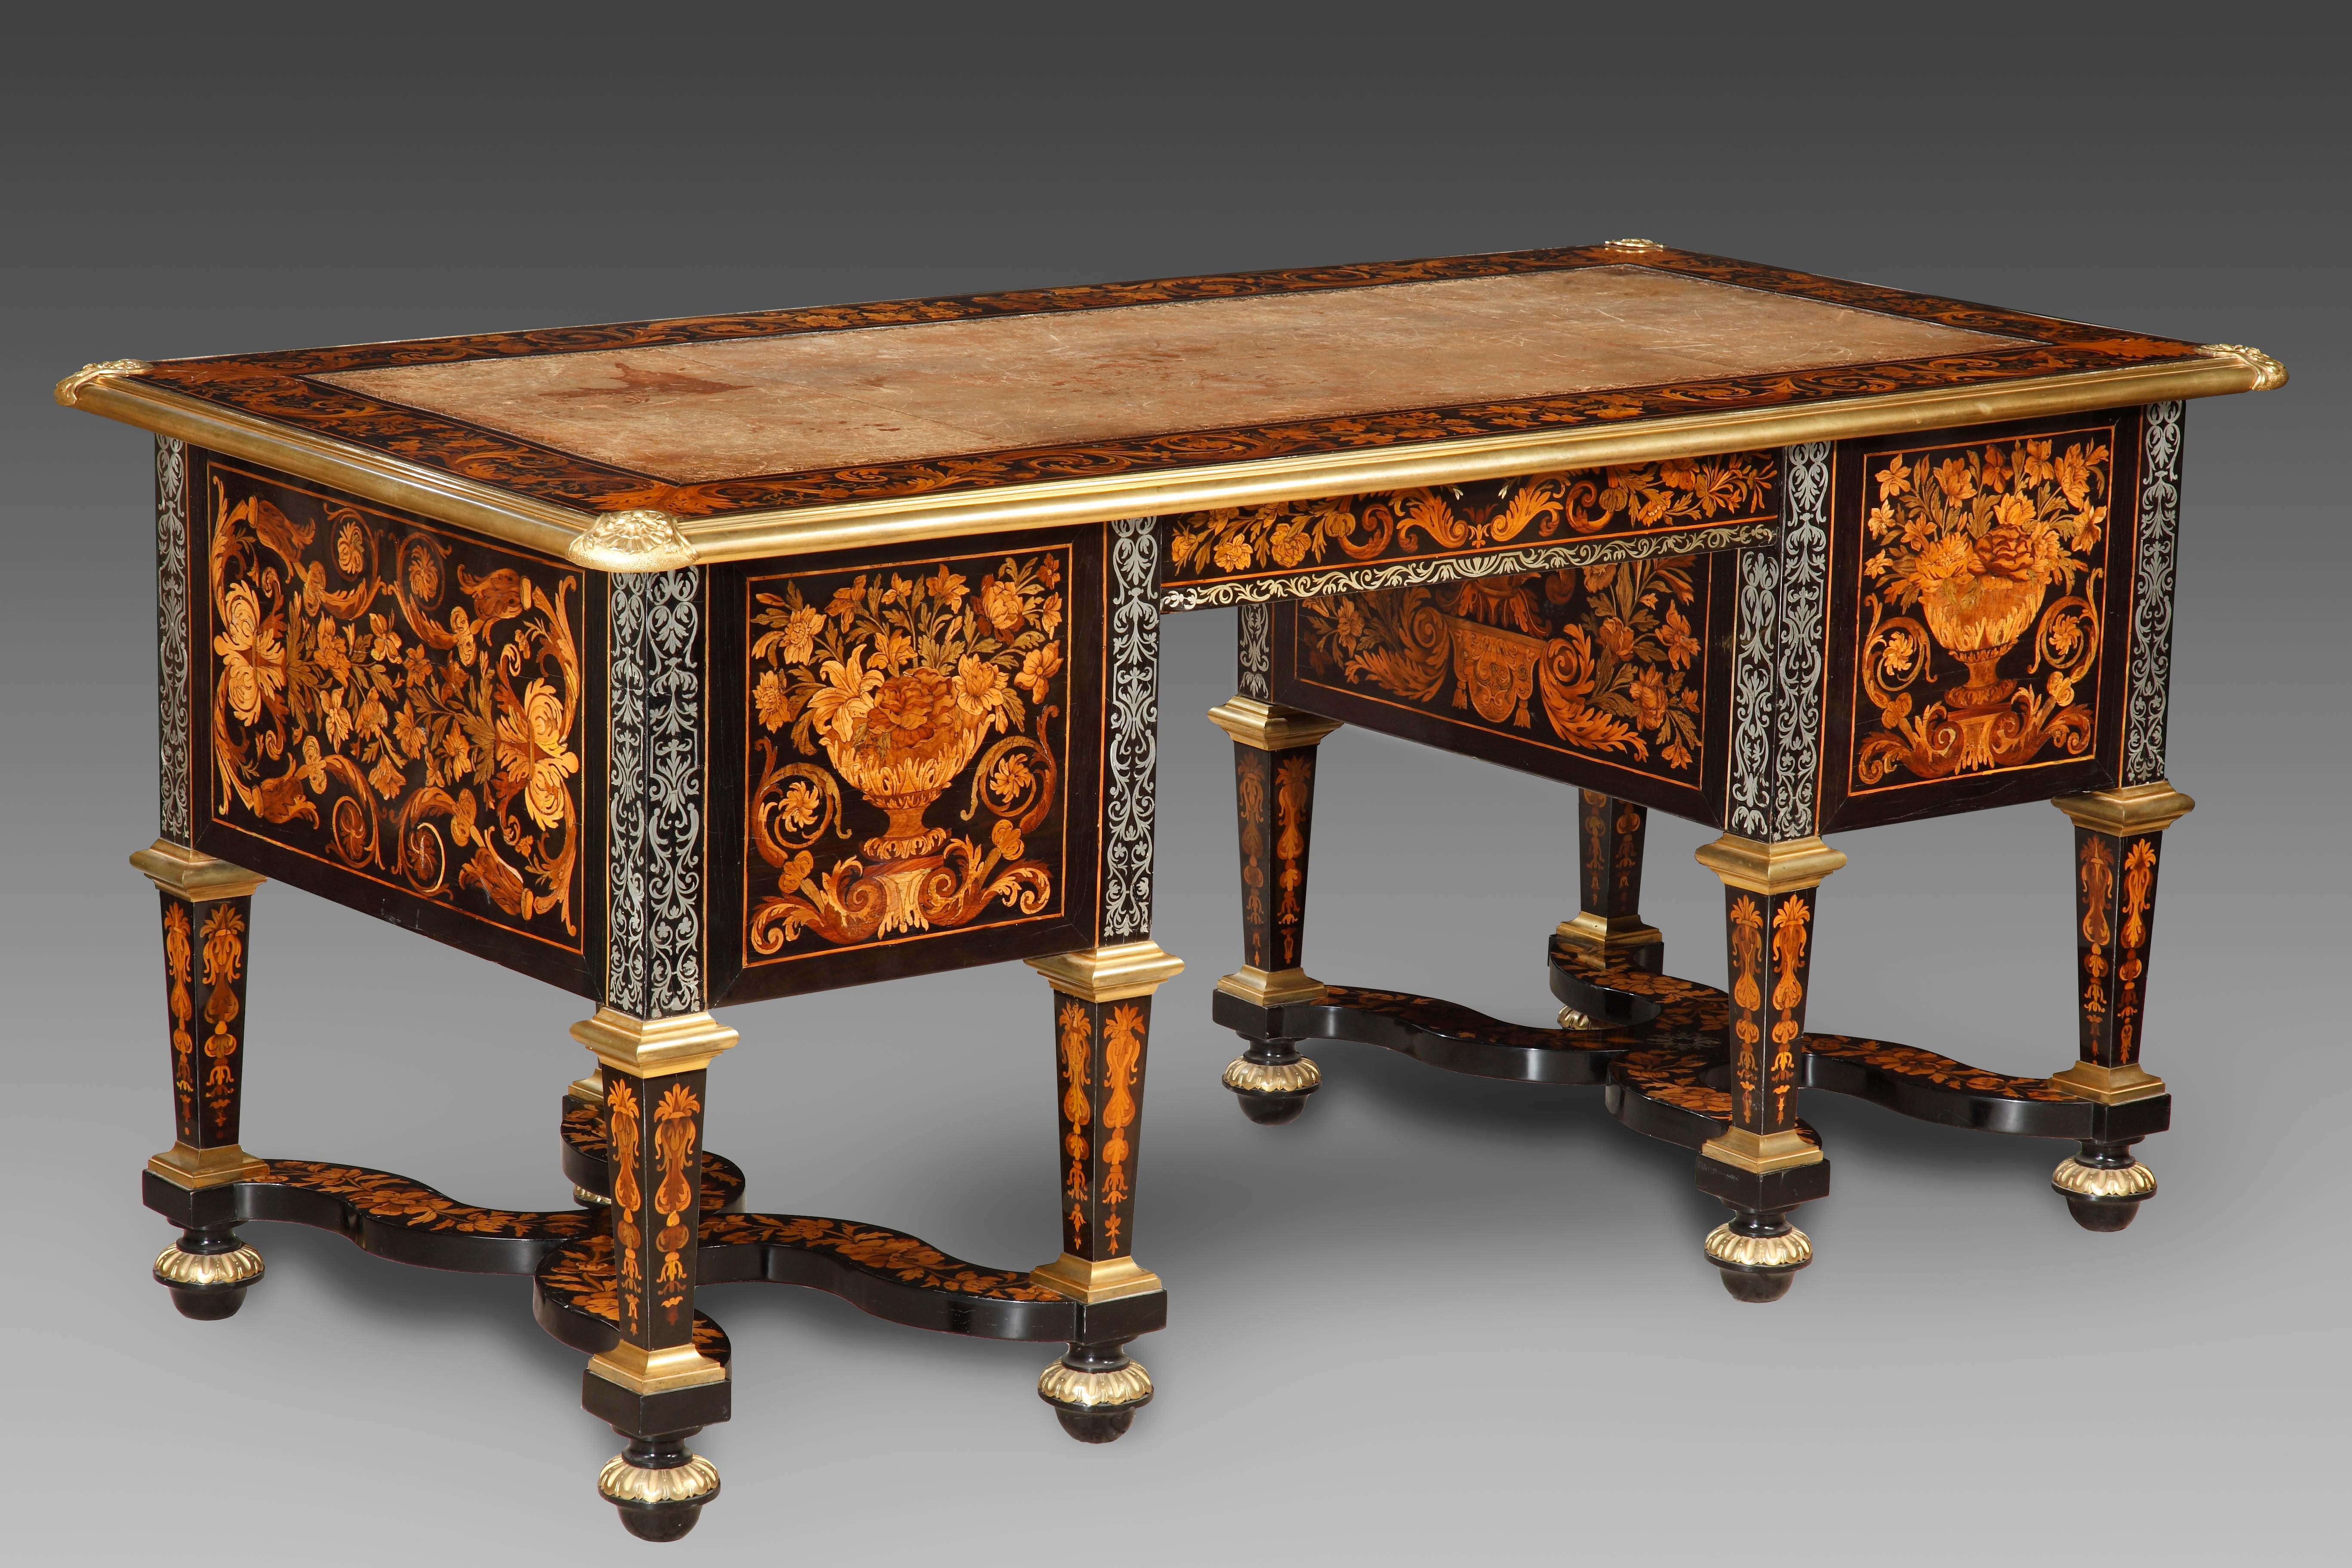 Inlay A rare French Louis XIV large pewter and fruitwood inlaid marquetry desk For Sale